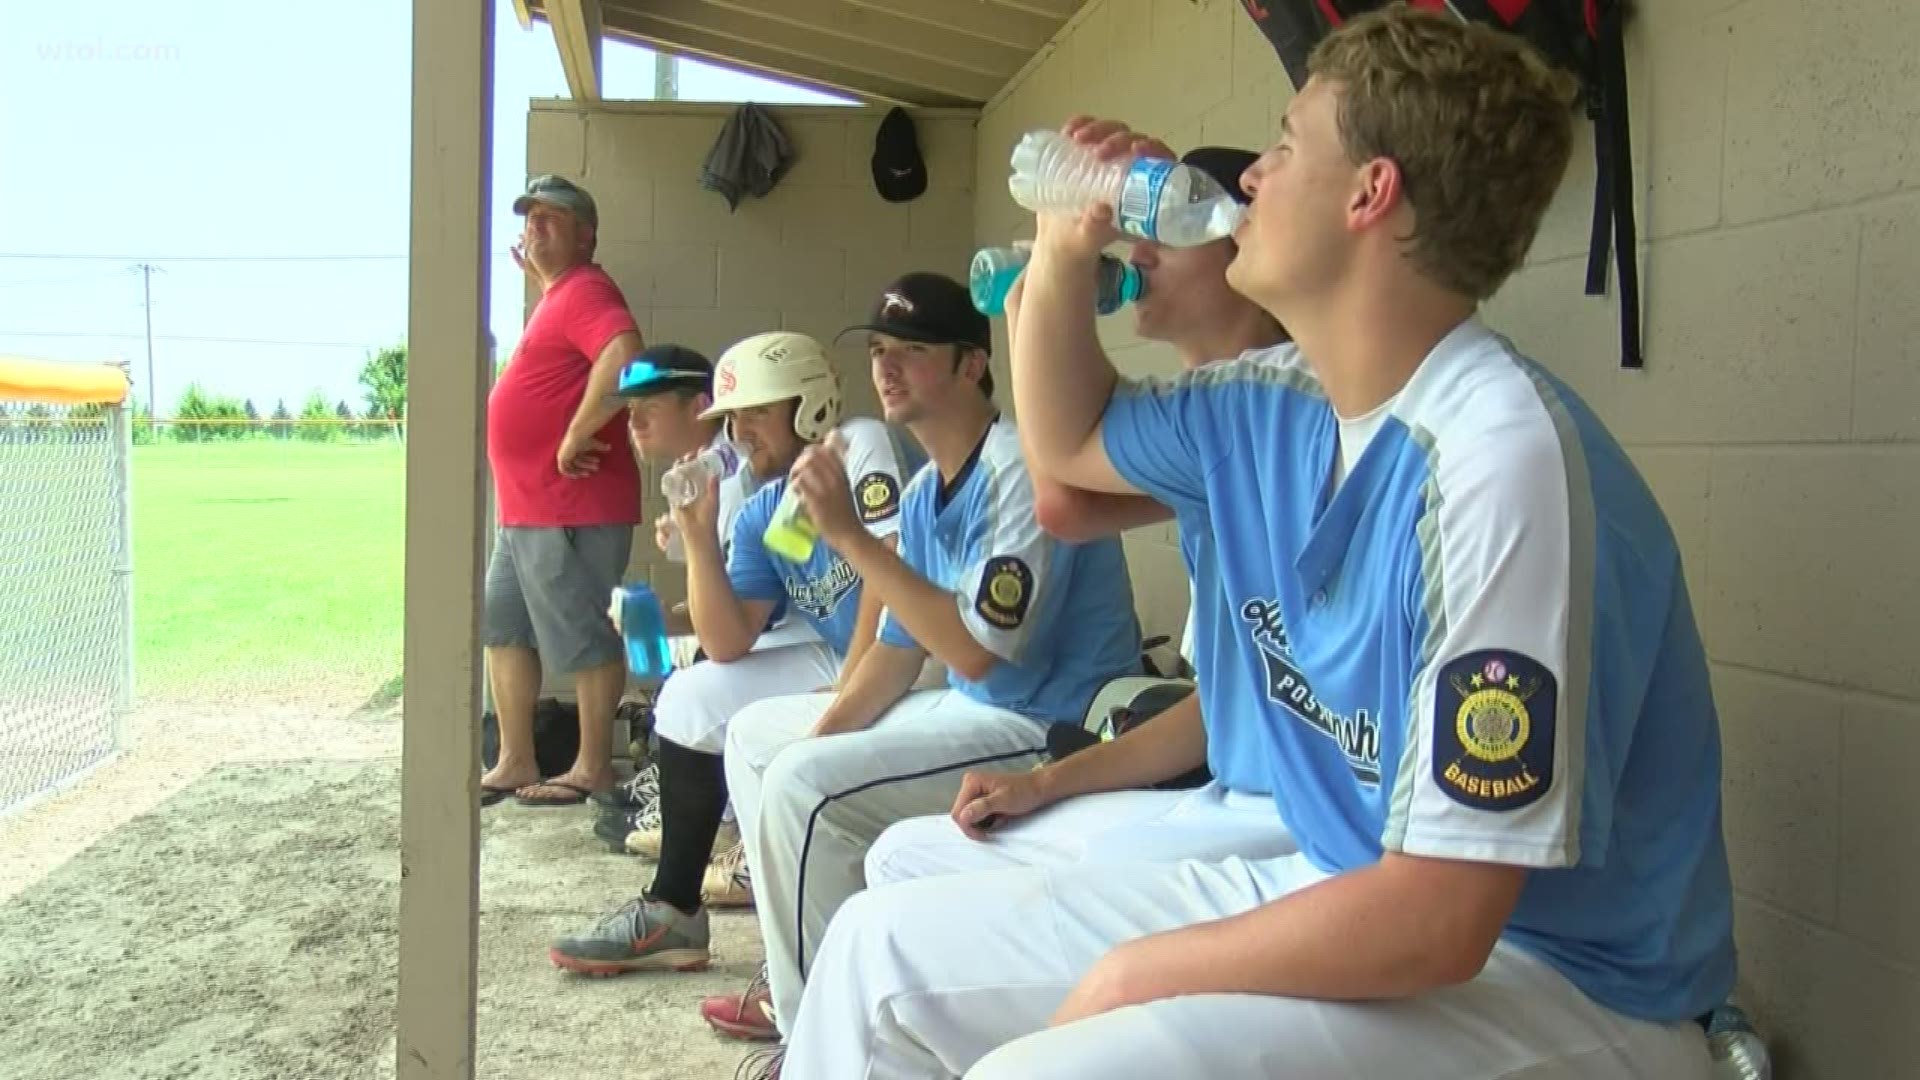 The boys out in the field in Pemberville took precautions against the heat.